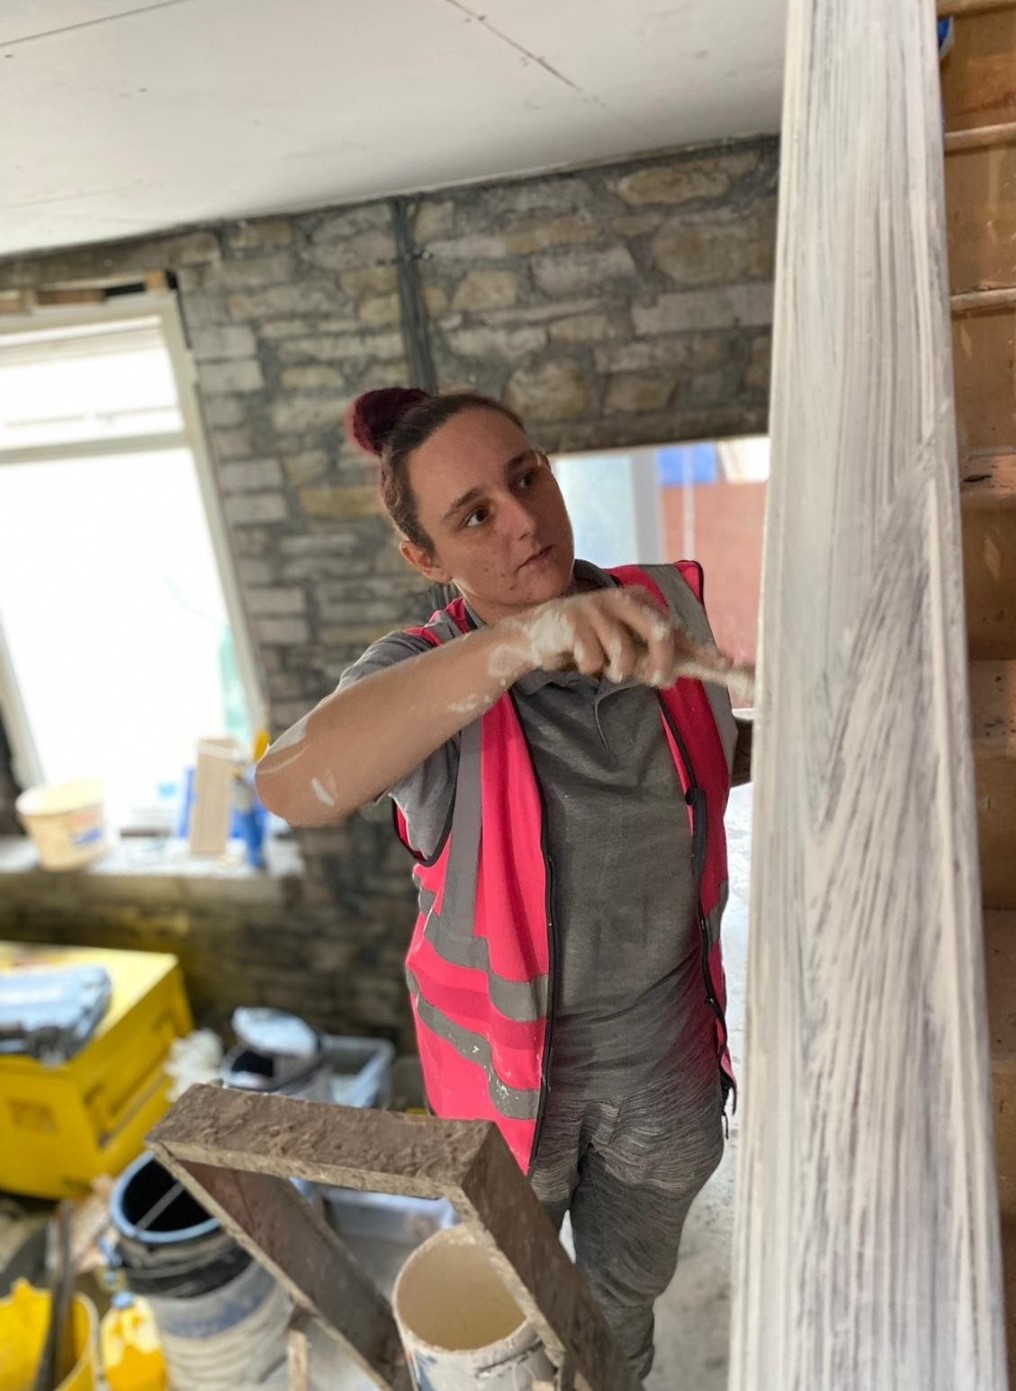 Building skills for life and empowering change: Social change organisation renovating homes and transforming lives in South Wales